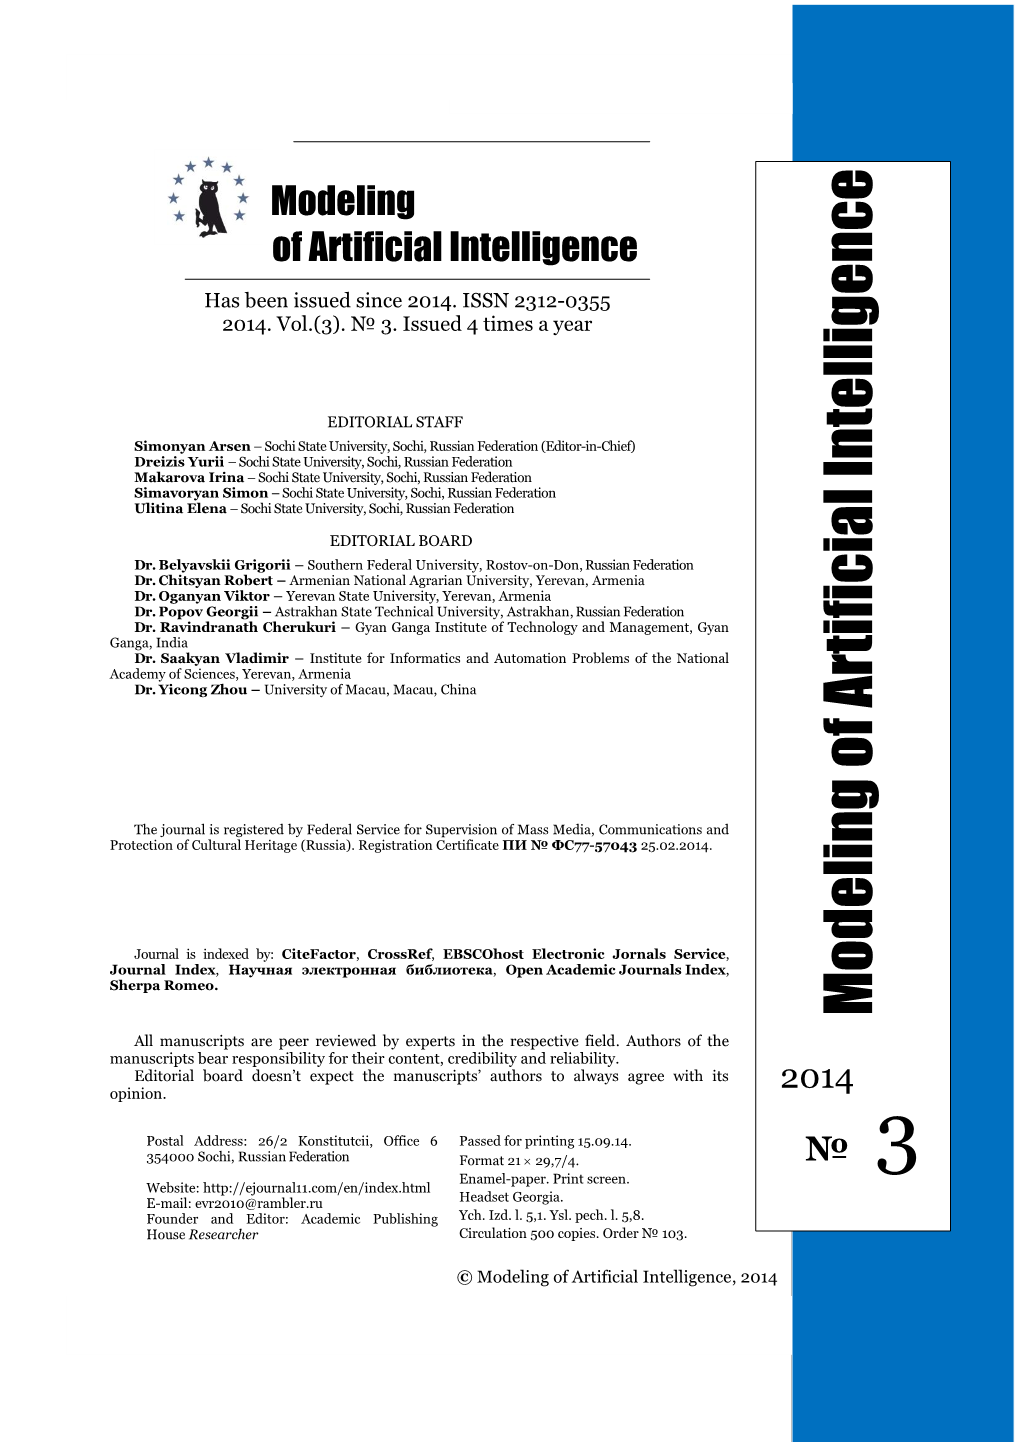 Modeling of Artificial Intelligence, 2014, Vol.(3), № 3